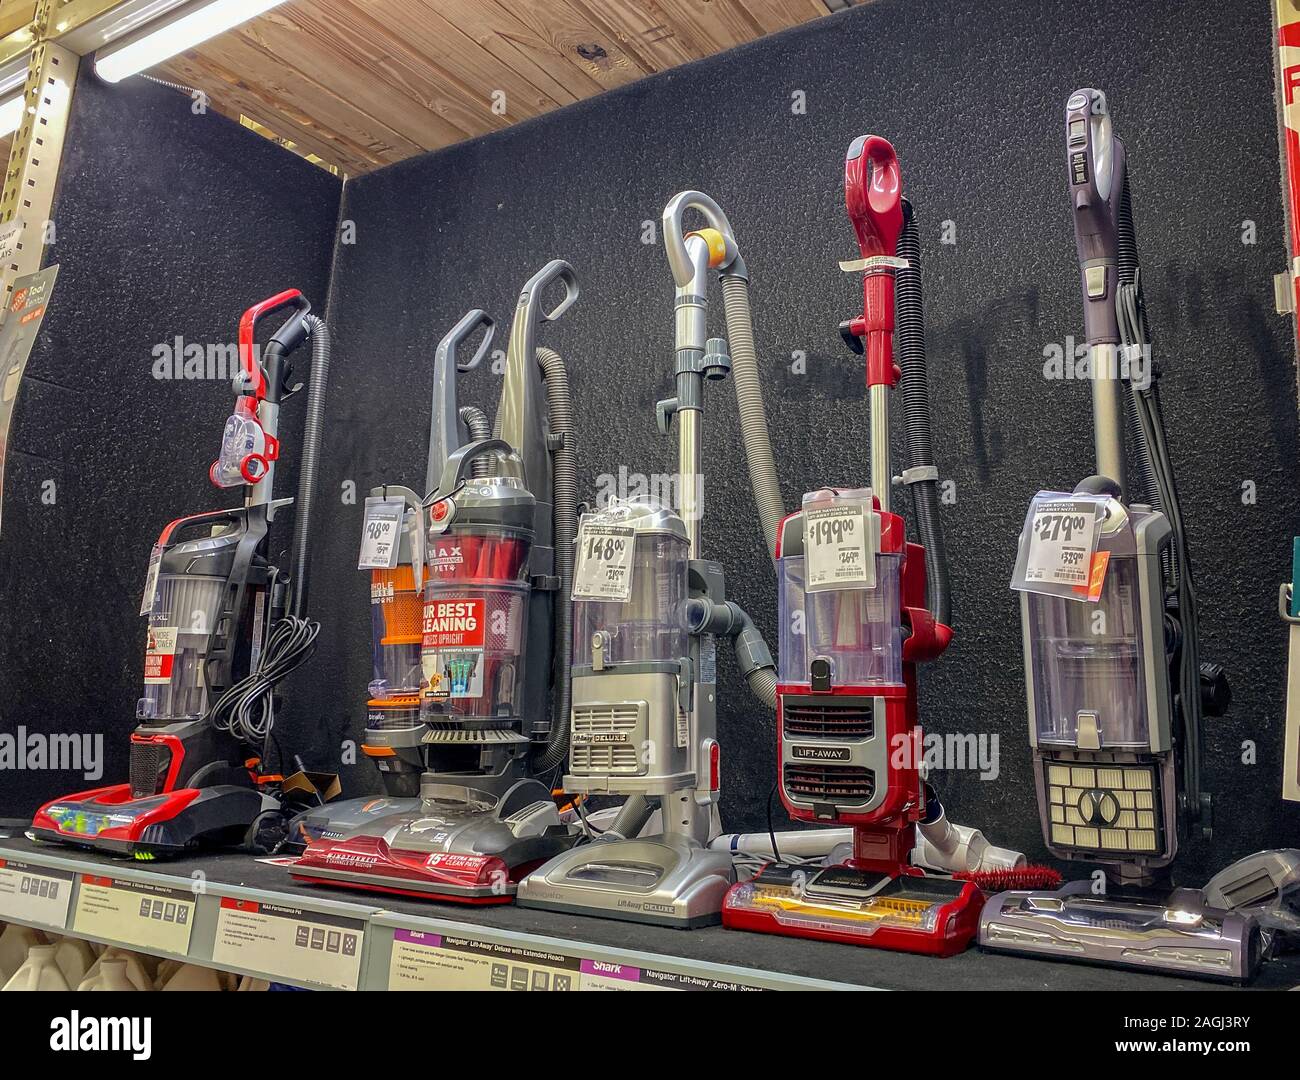 Orlando,FL/USA-11/11/19: A display shelf of vacuums for sale at a Home Depot store. Stock Photo